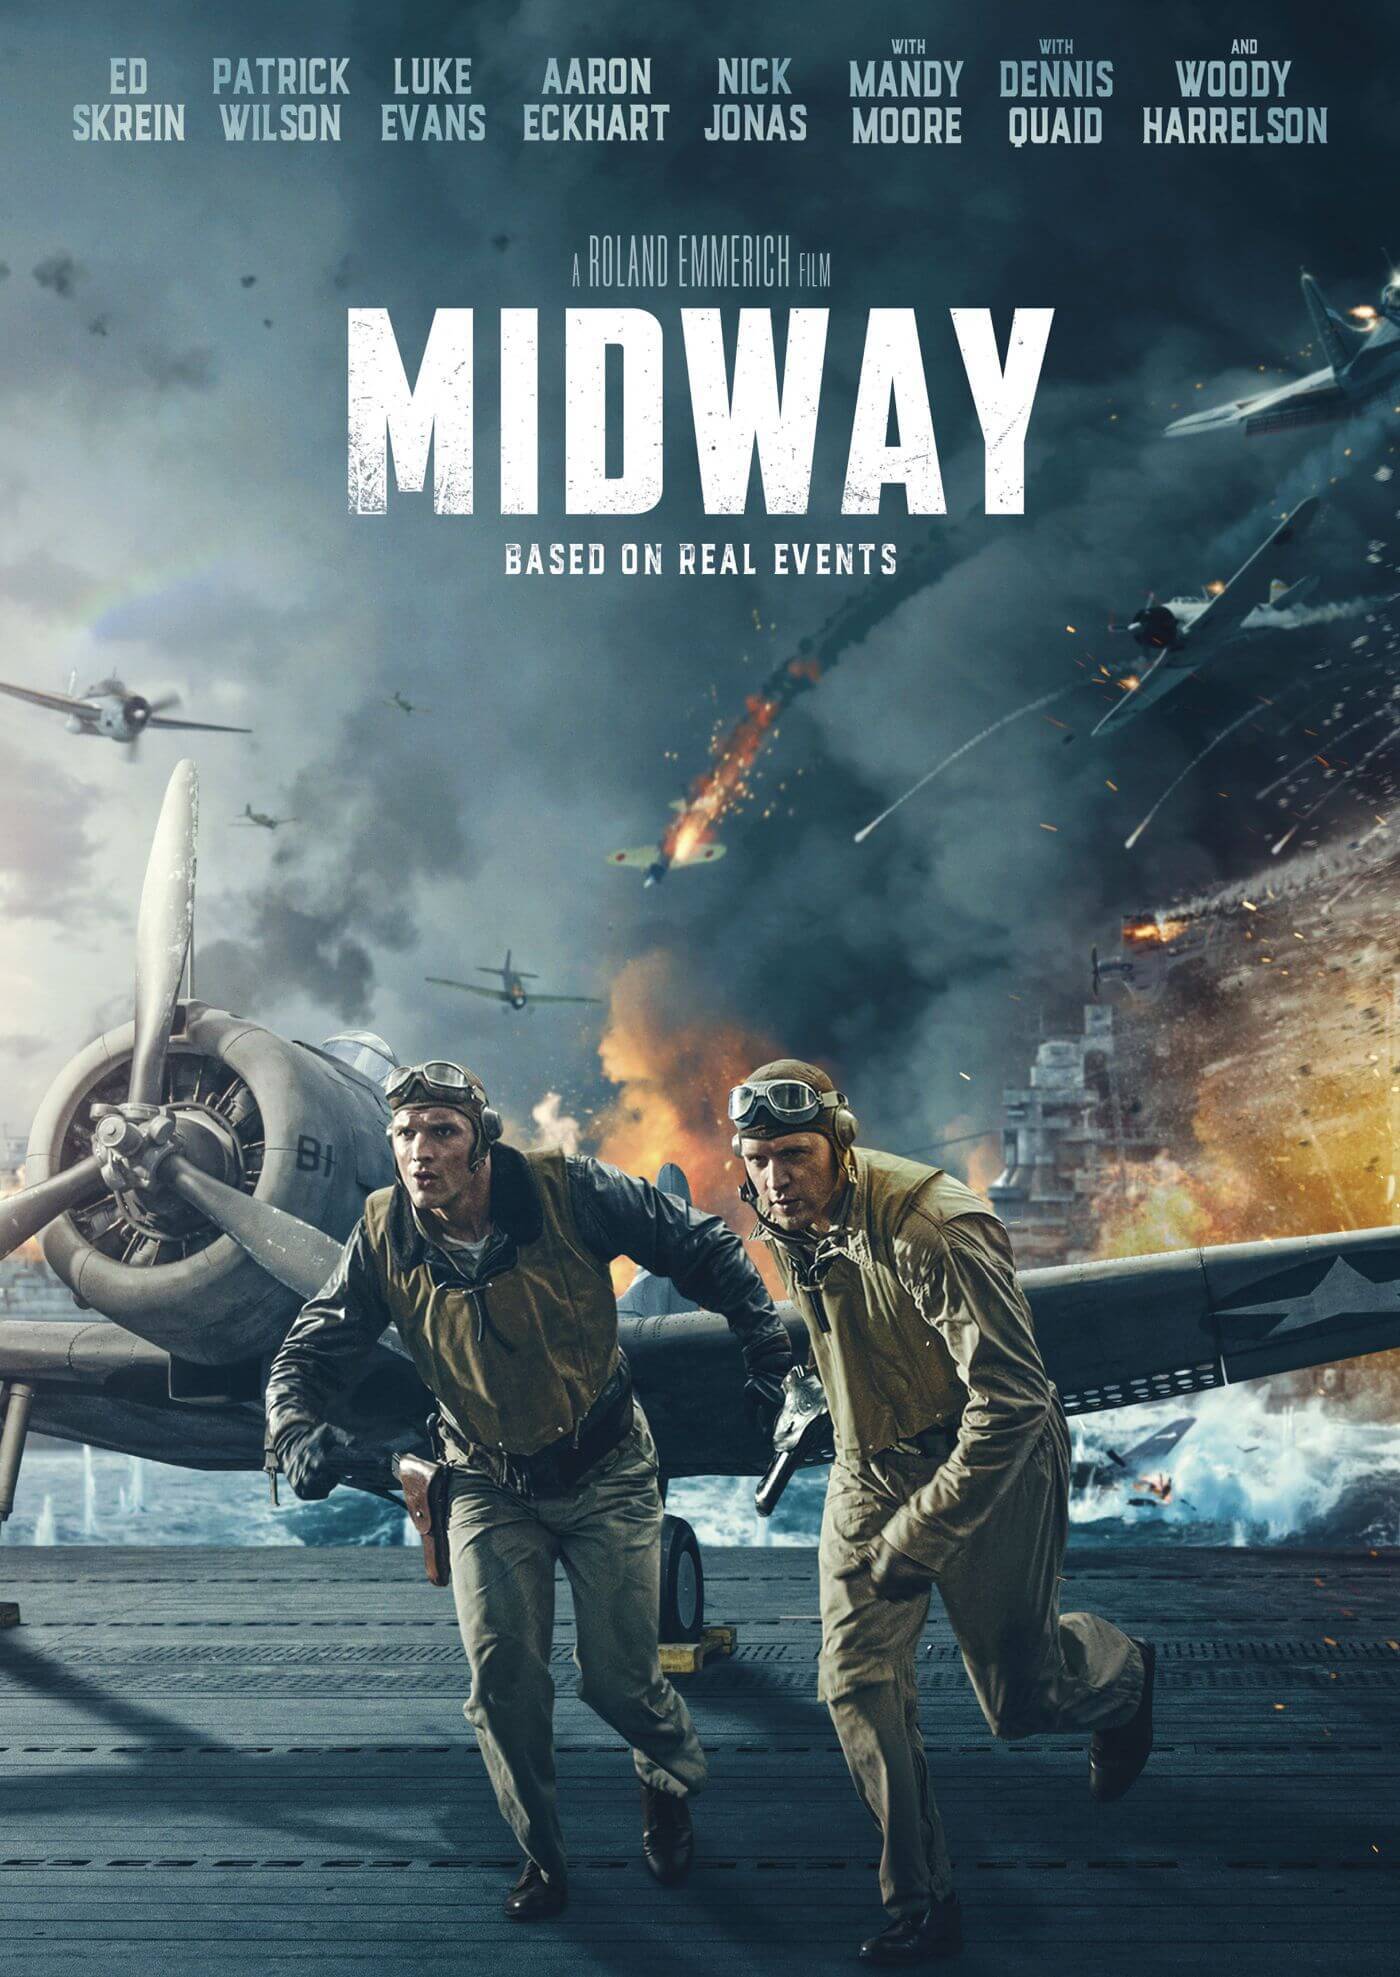 Midway (2019) - Ed Skrein - Hollywood War WW2 Movie Poster - Art Prints by  Kaiden Thompson | Buy Posters, Frames, Canvas & Digital Art Prints | Small,  Compact, Medium and Large Variants